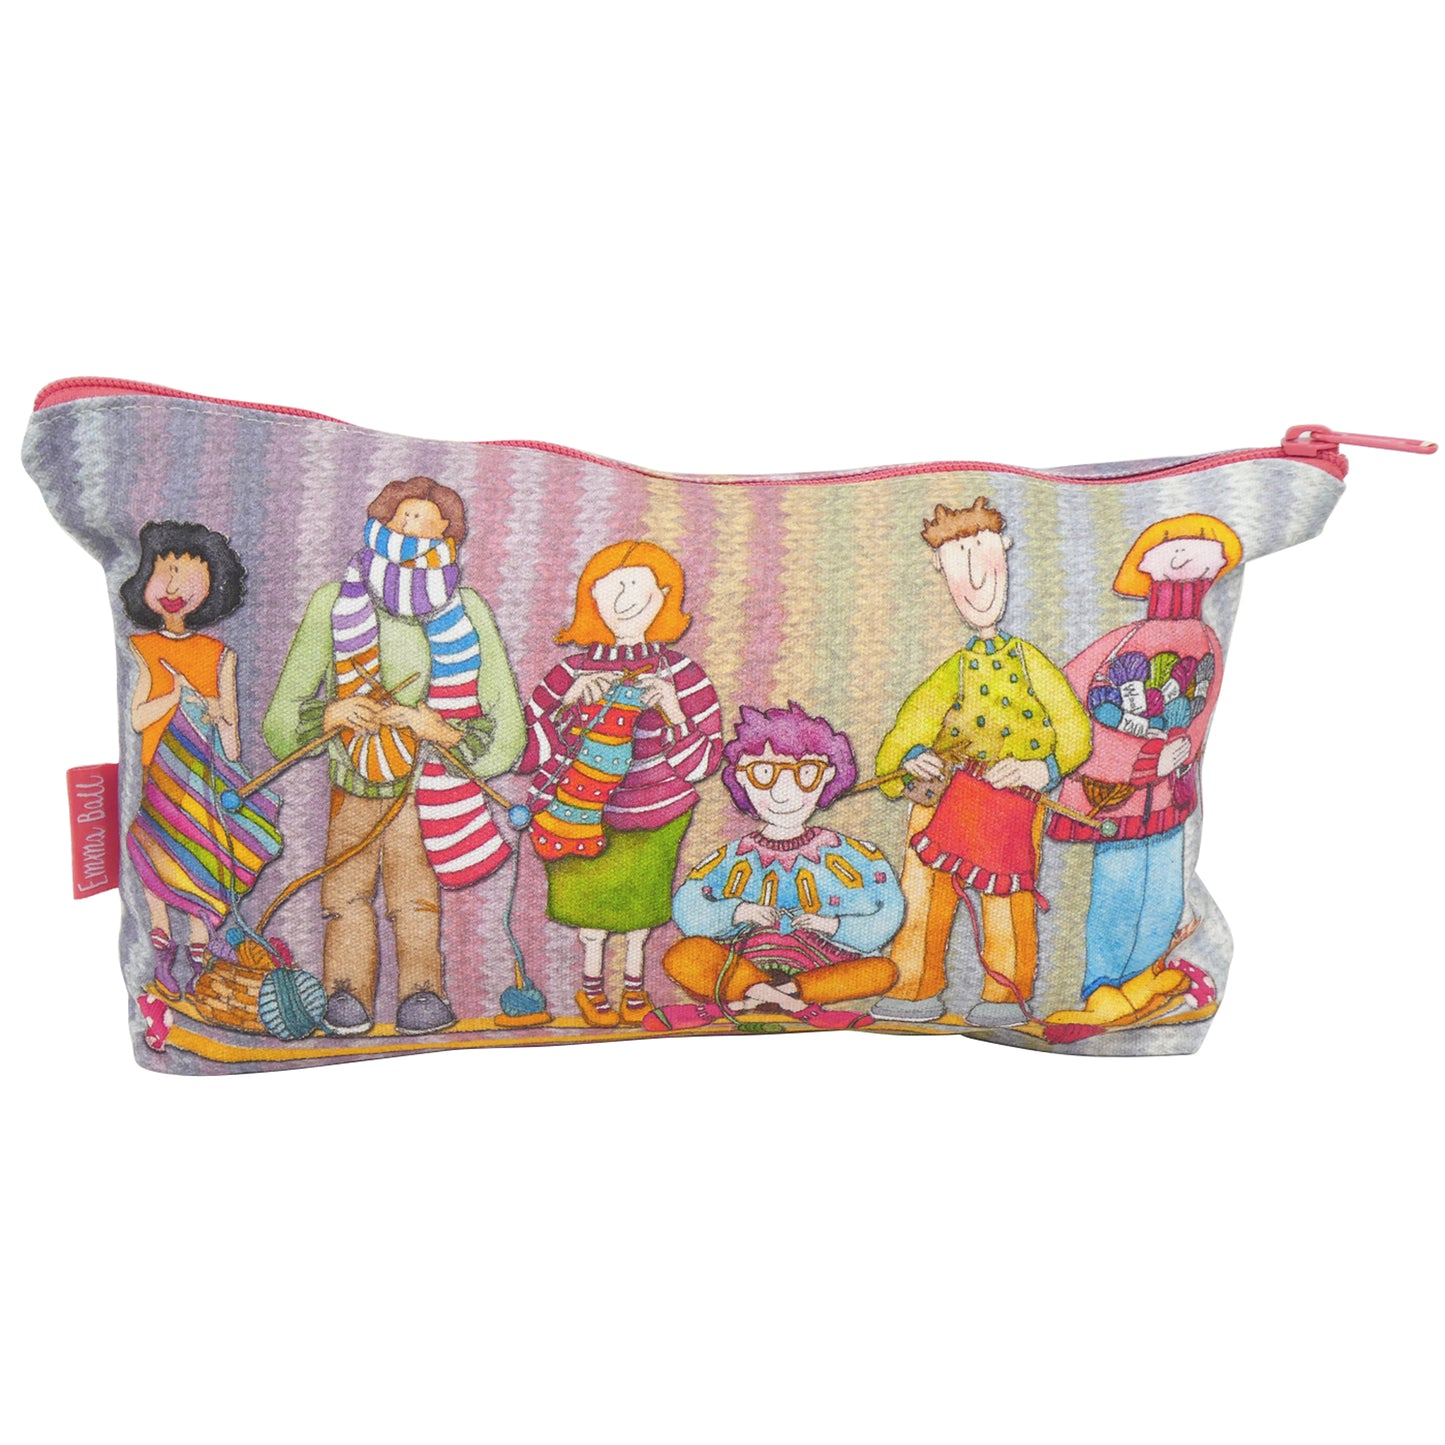 Zipped Pouch by Emma Ball